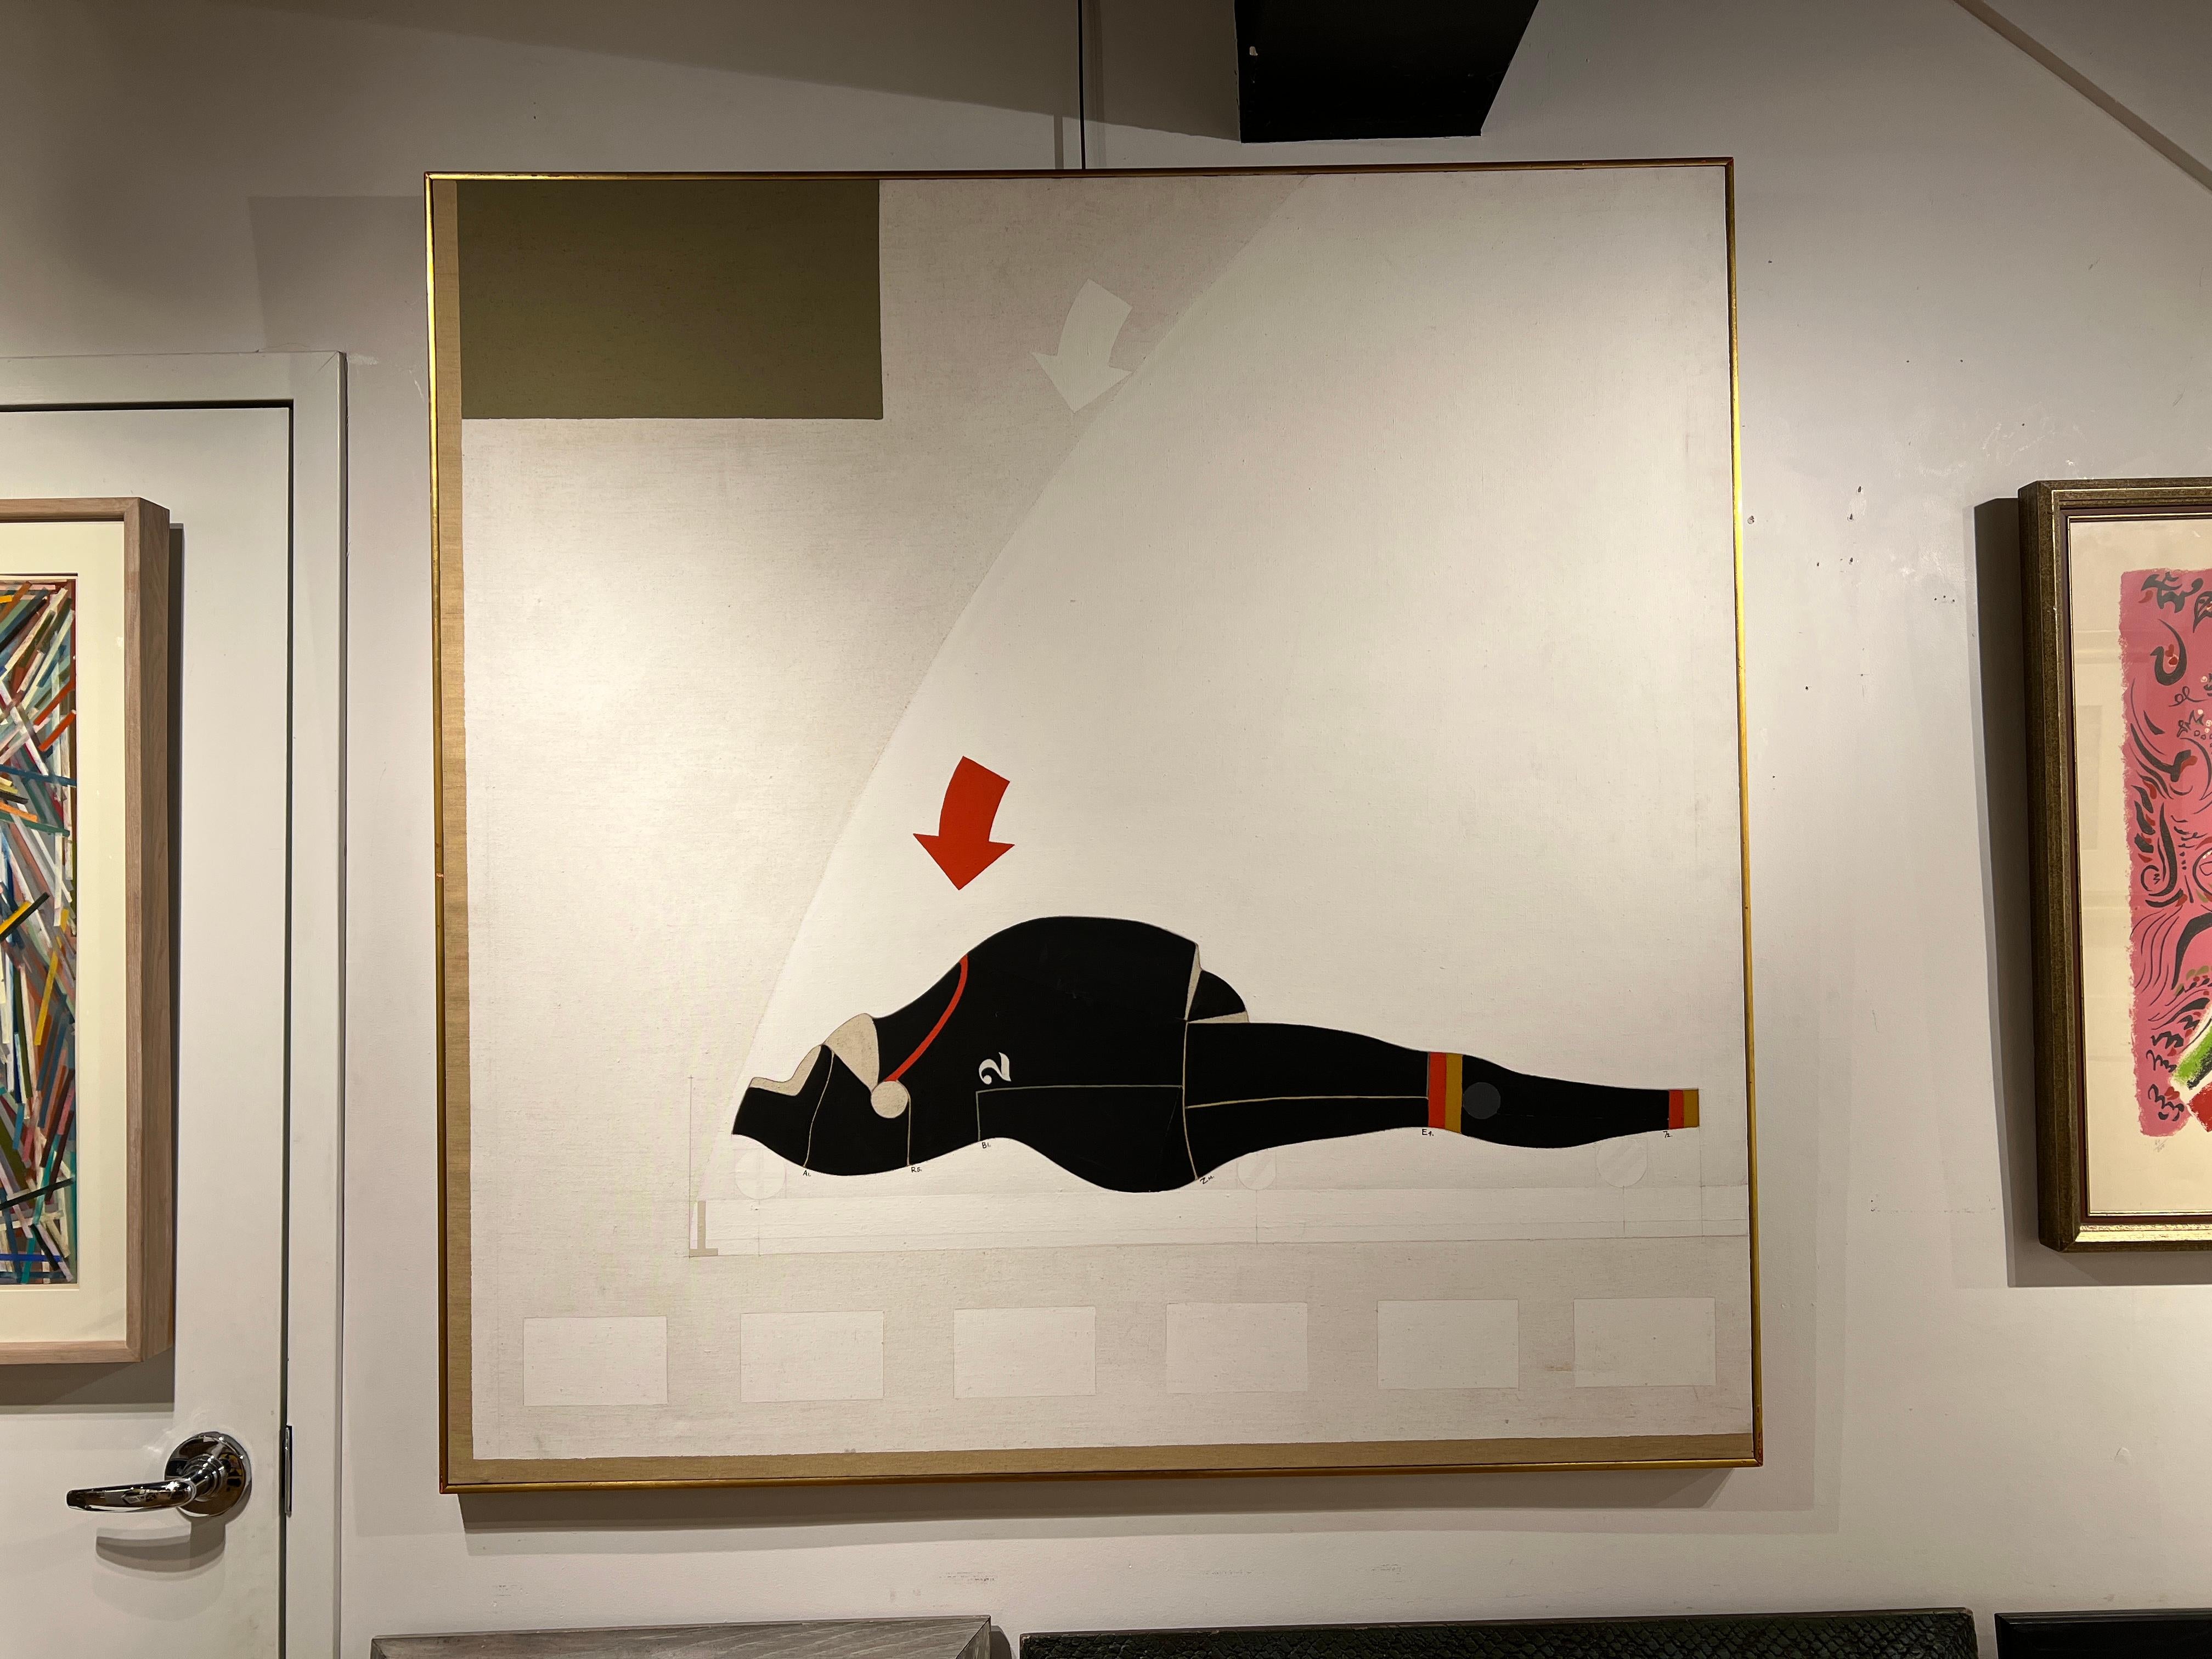 Falling Man, Black on White Background - American Modern Painting by Ernest Tino Trova